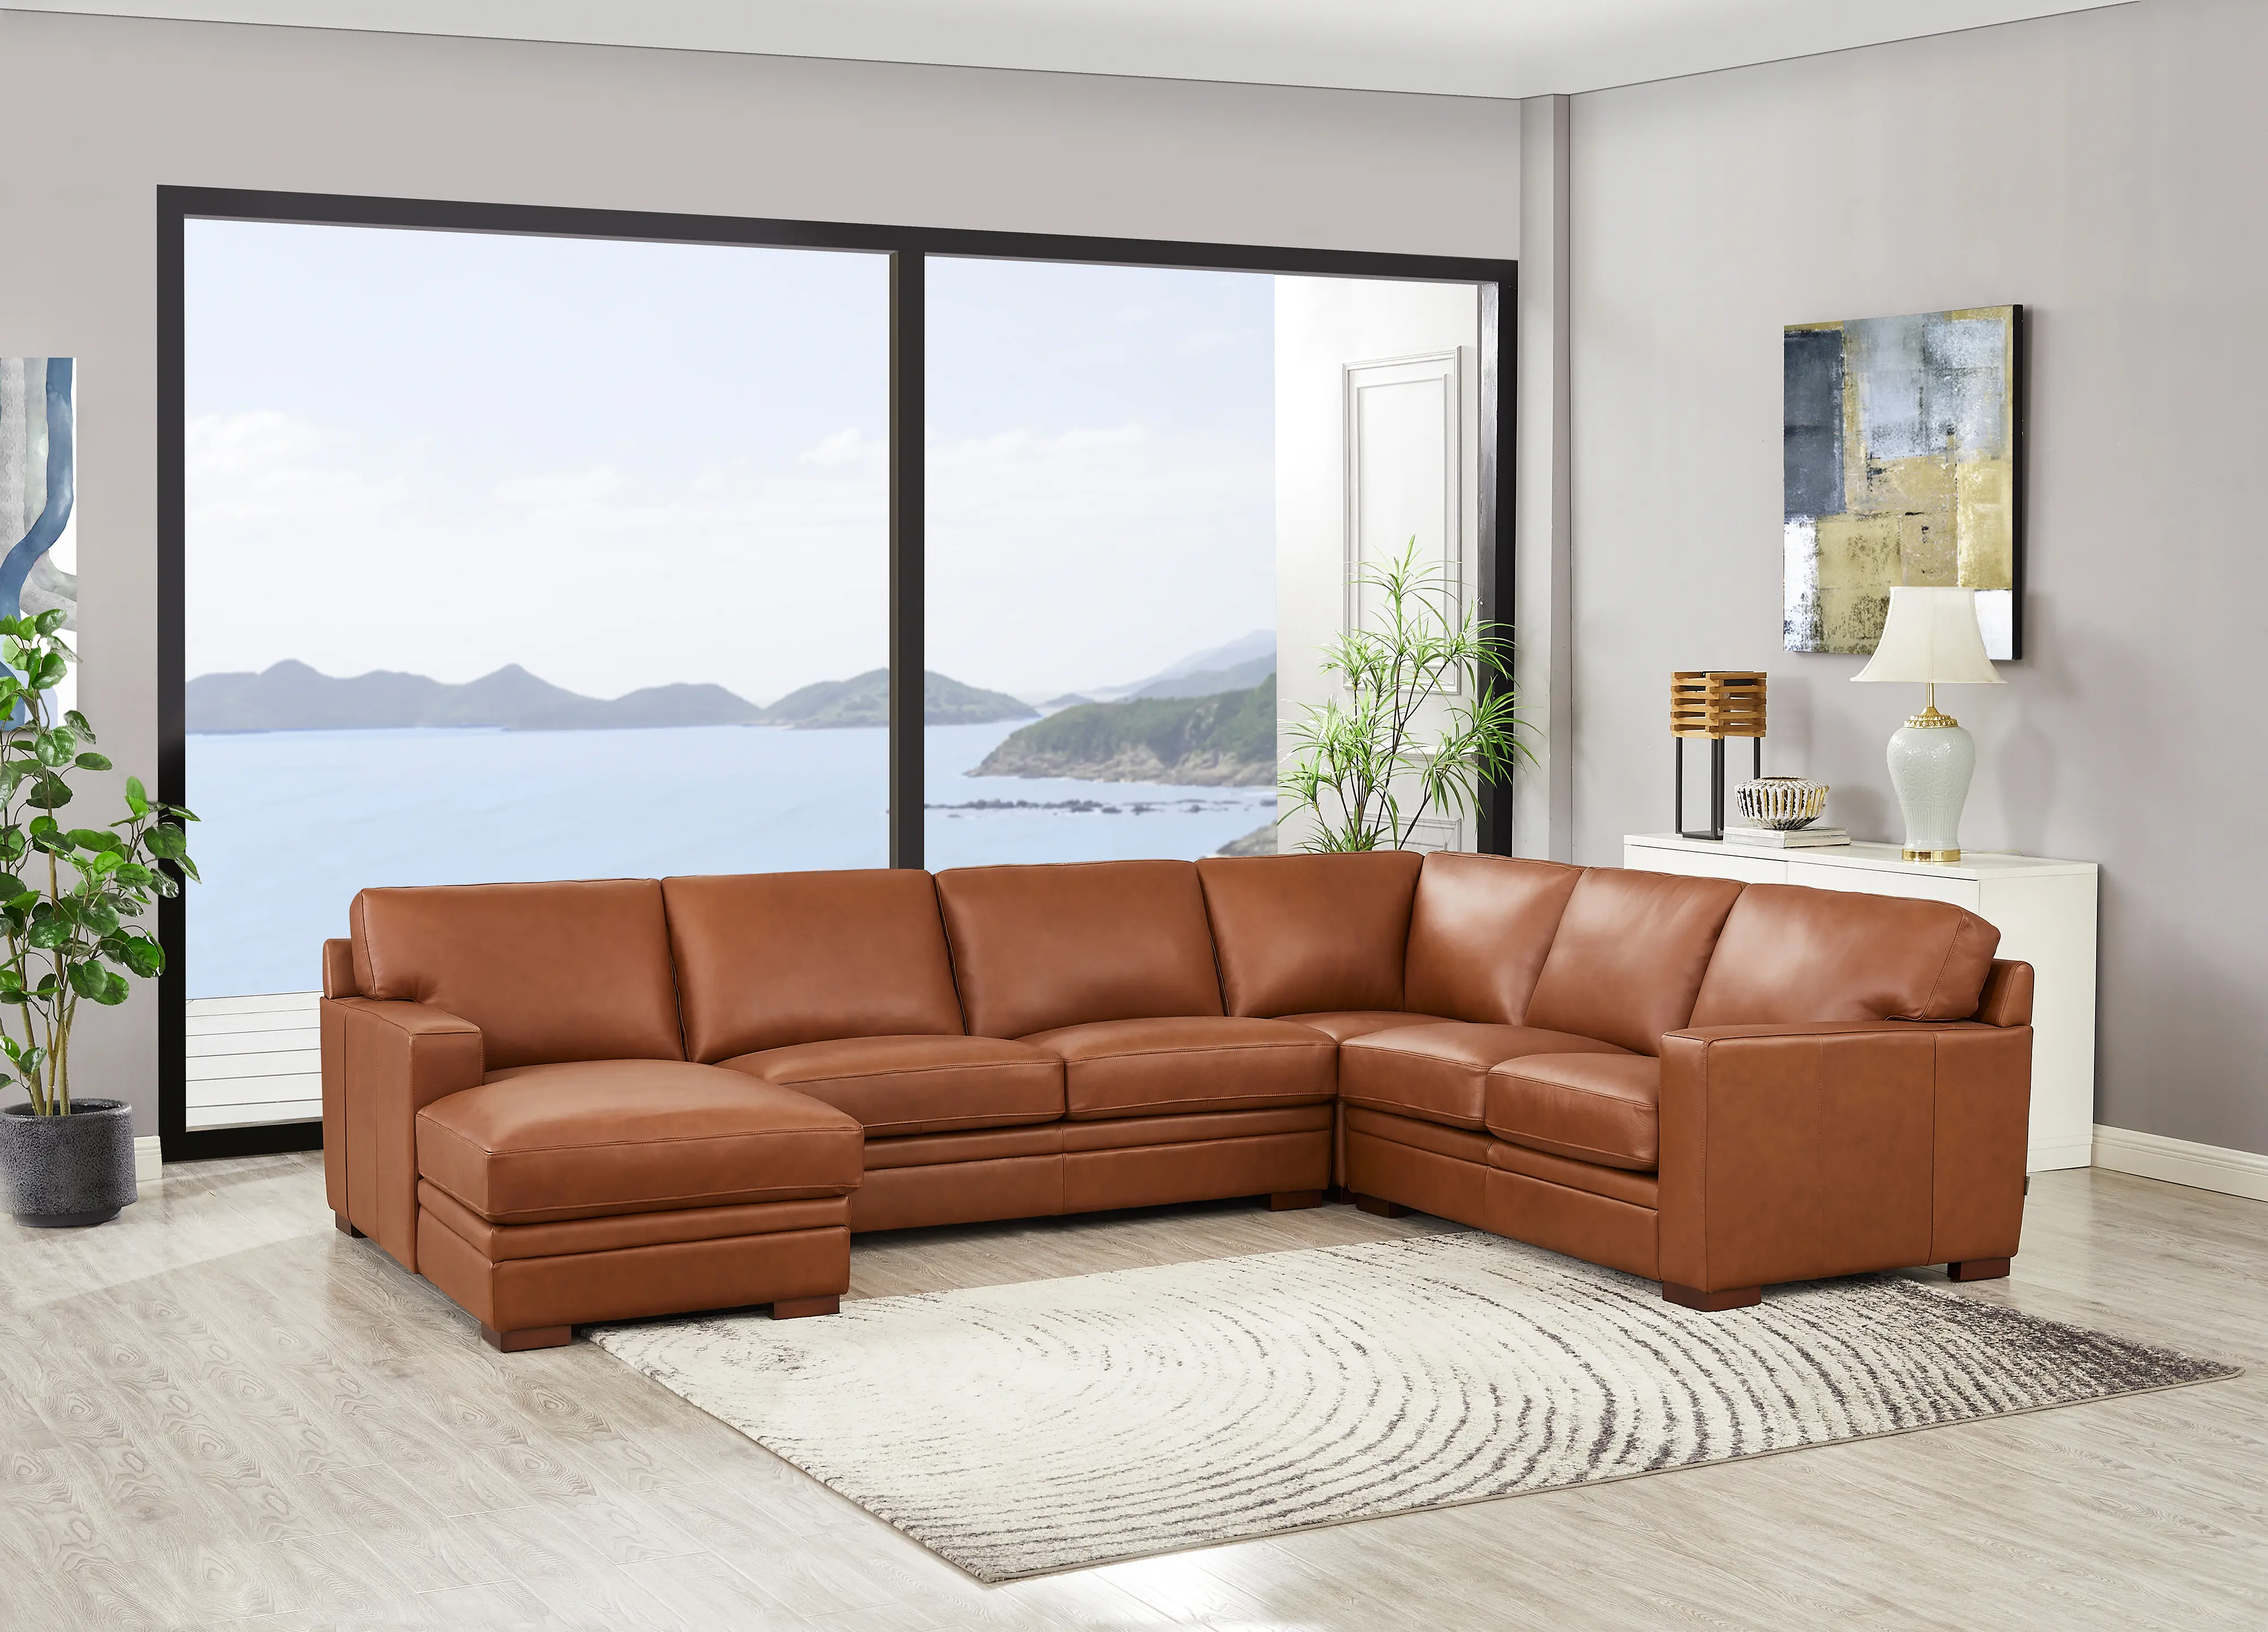 7727-SECT4-LHFCH-2362 Chatsworth Brown Leather 4 Piece Sectional with Le sku 7727-SECT4-LHFCH-2362